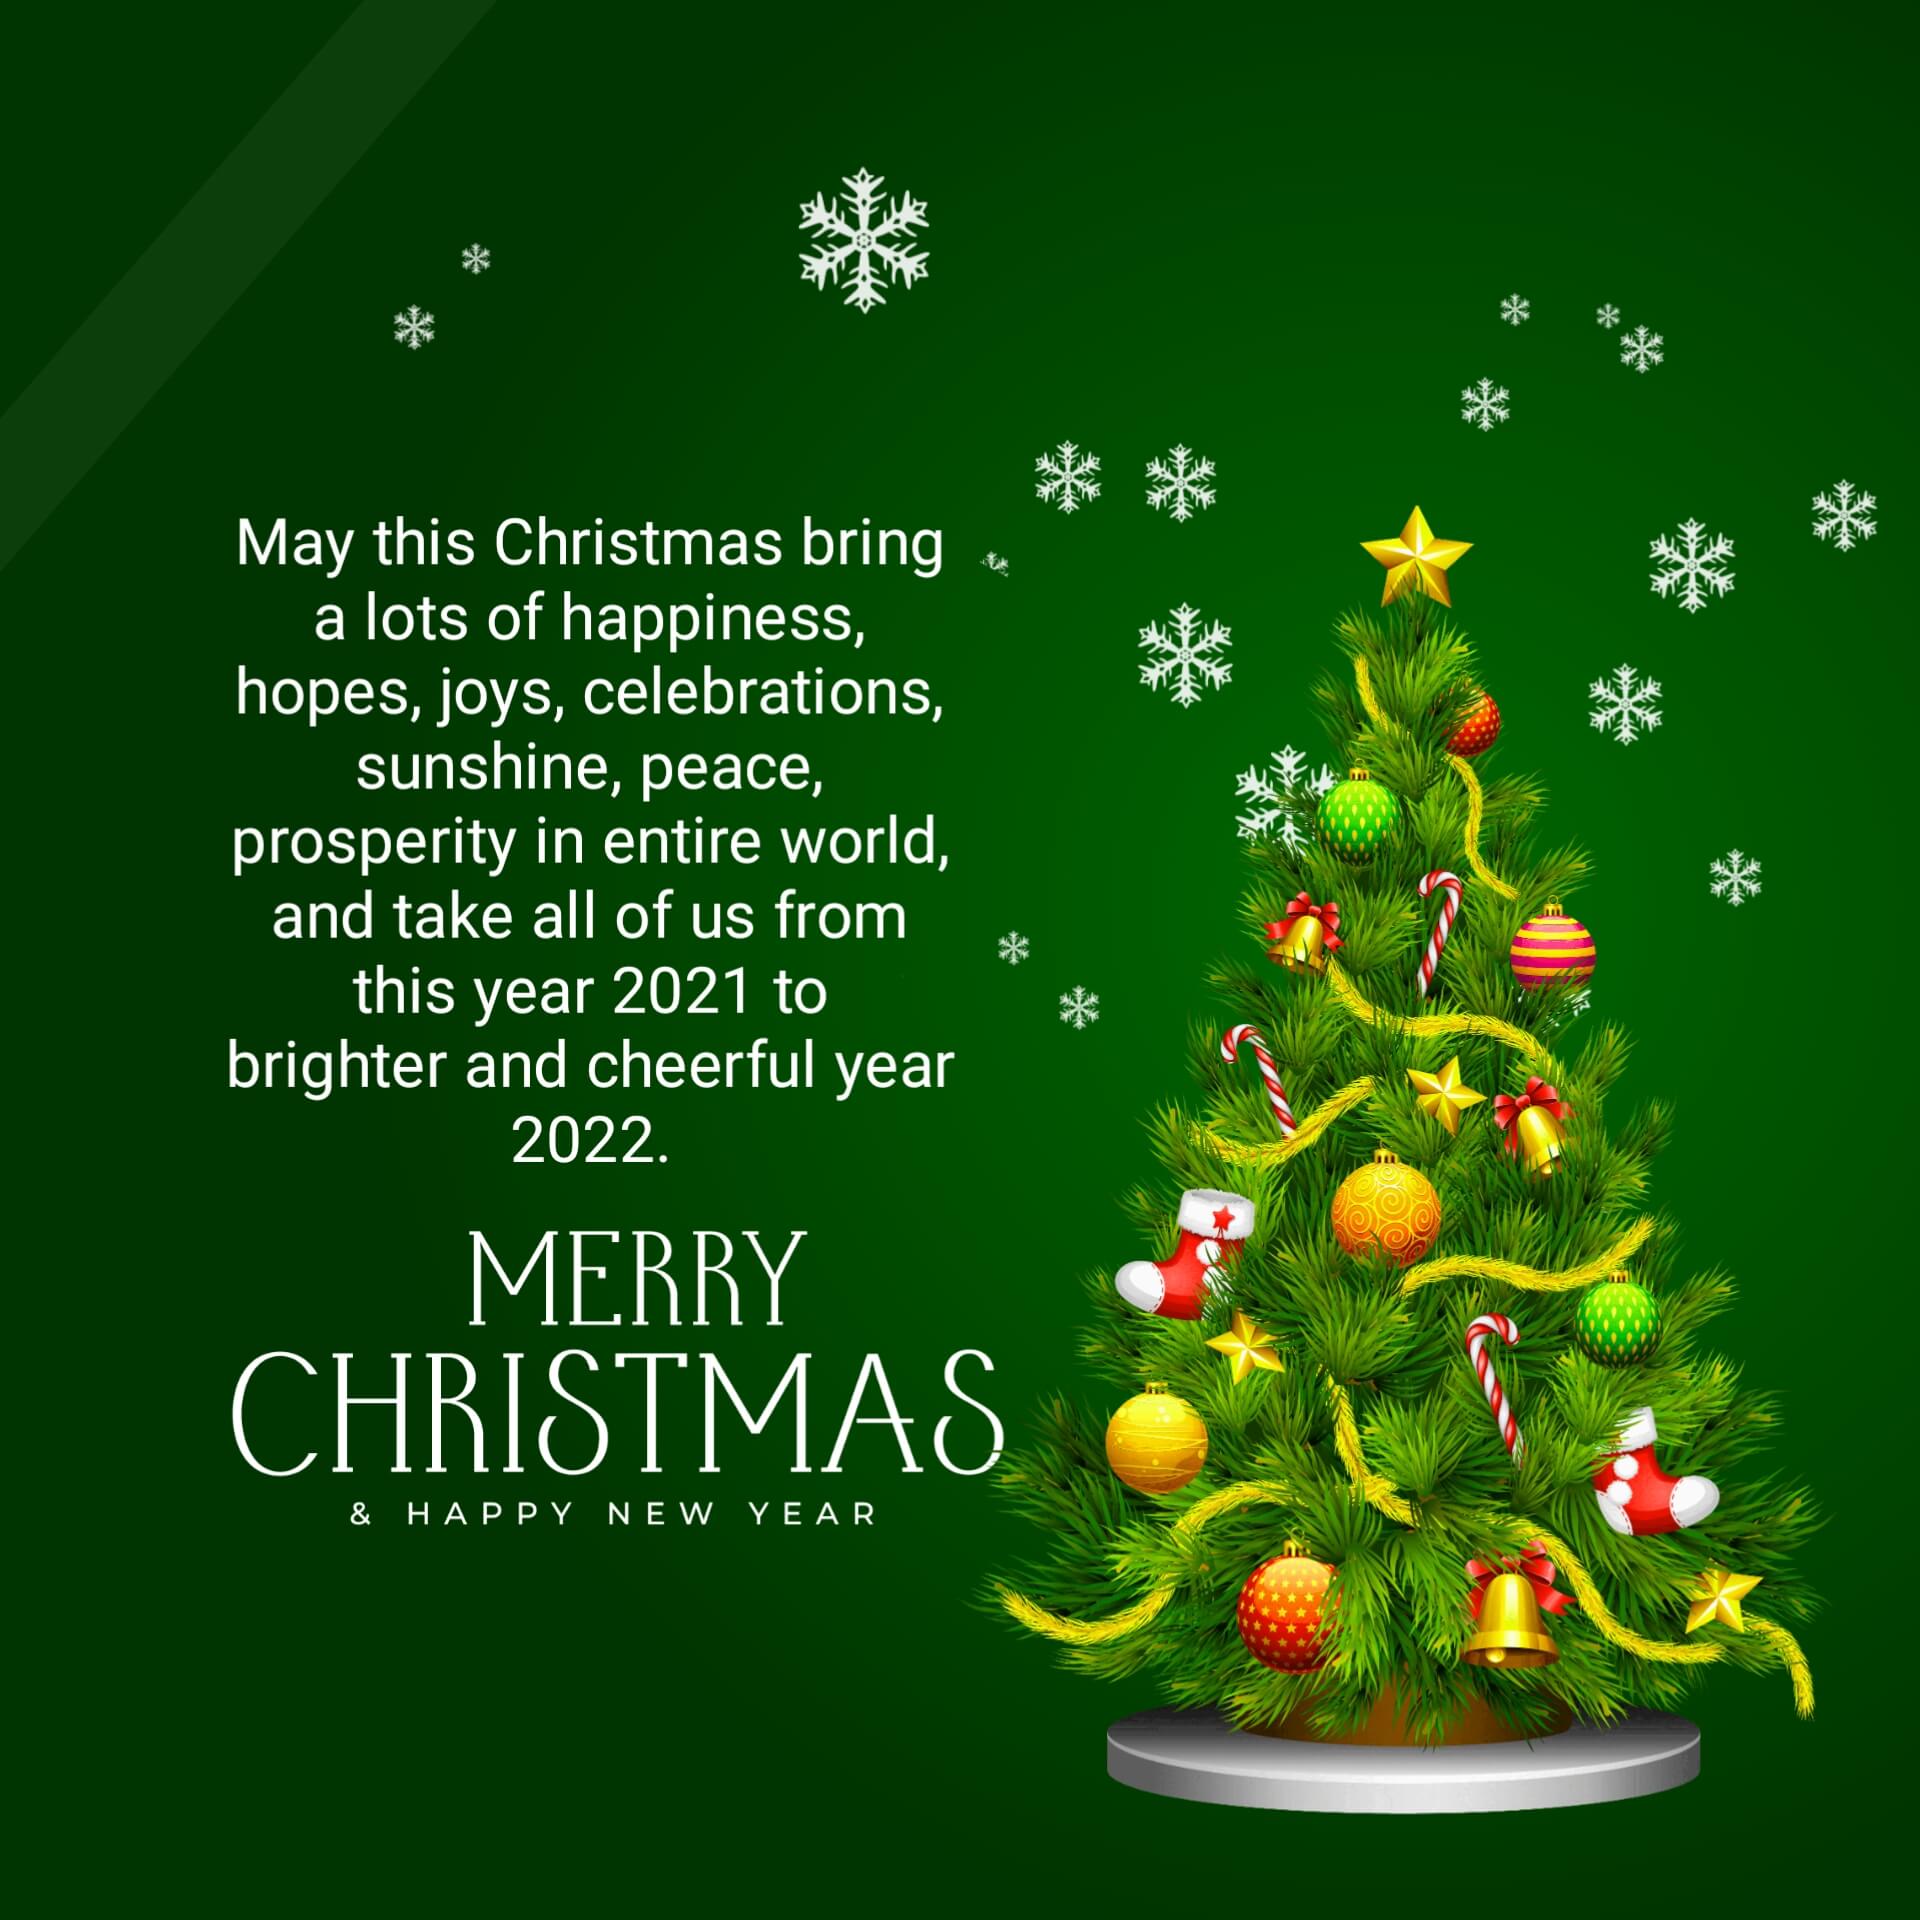 Merry Christmas Images with Quotes